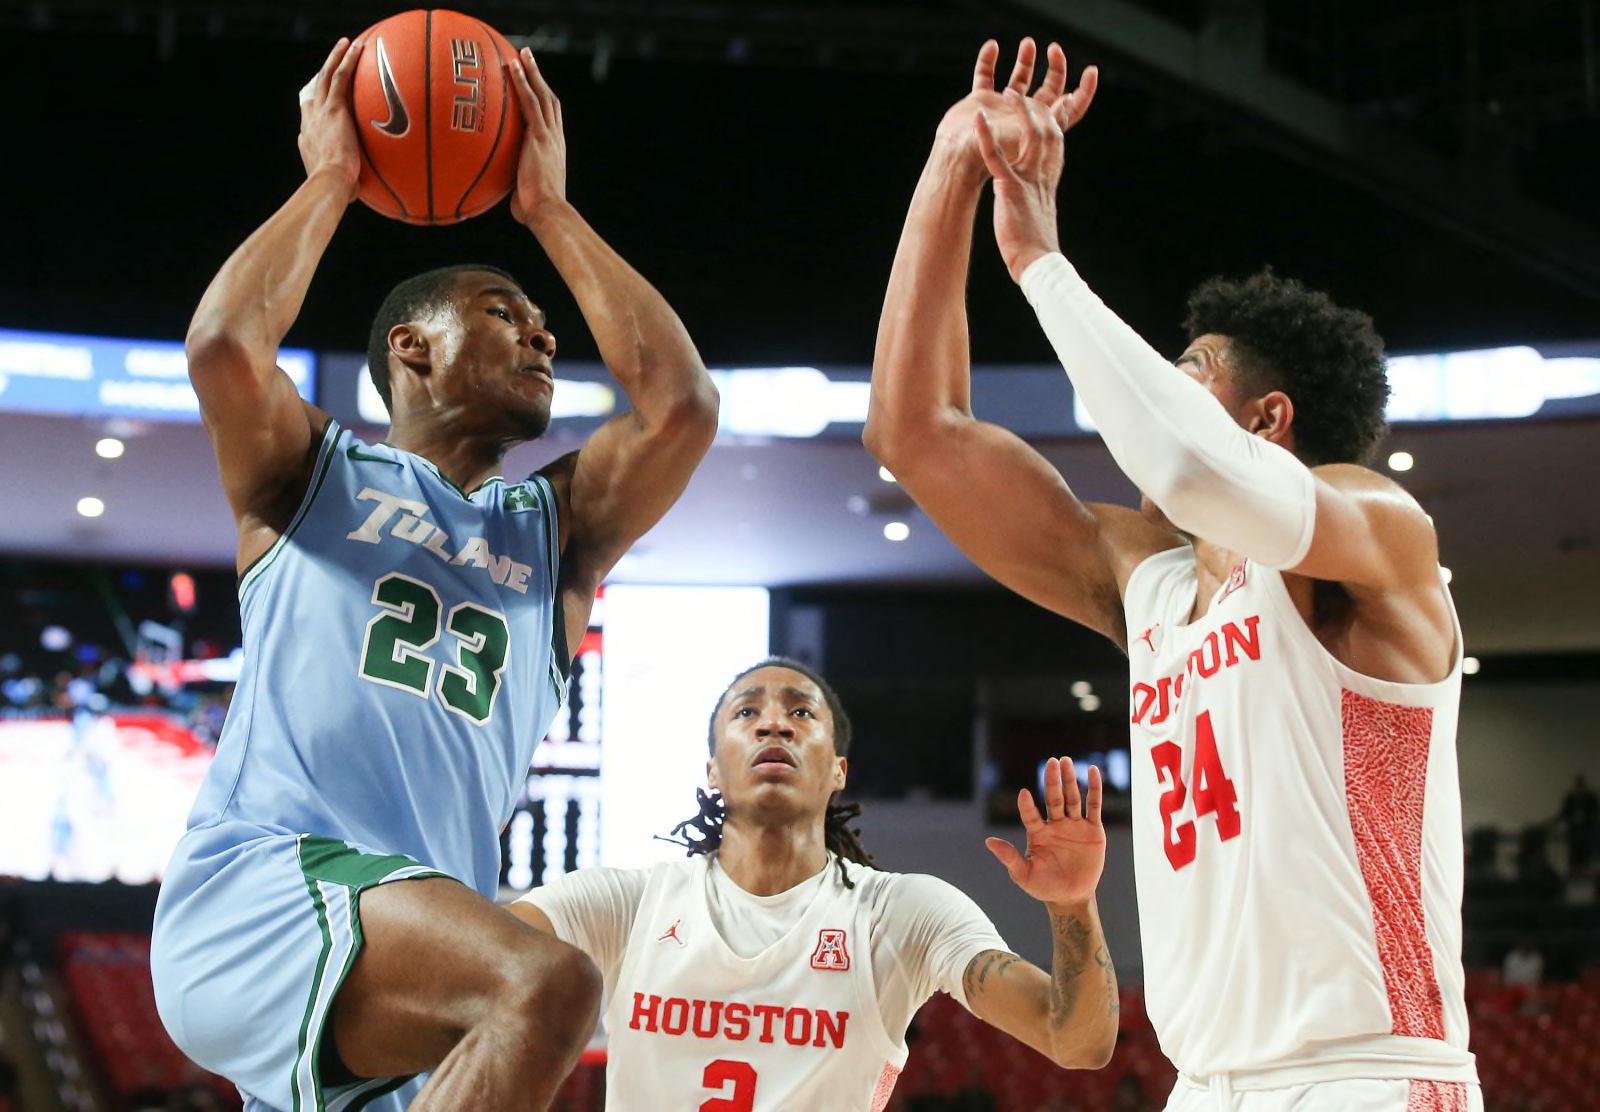 Tulane Basketball: 2020-21 season preview for the Green Wave - Page 3